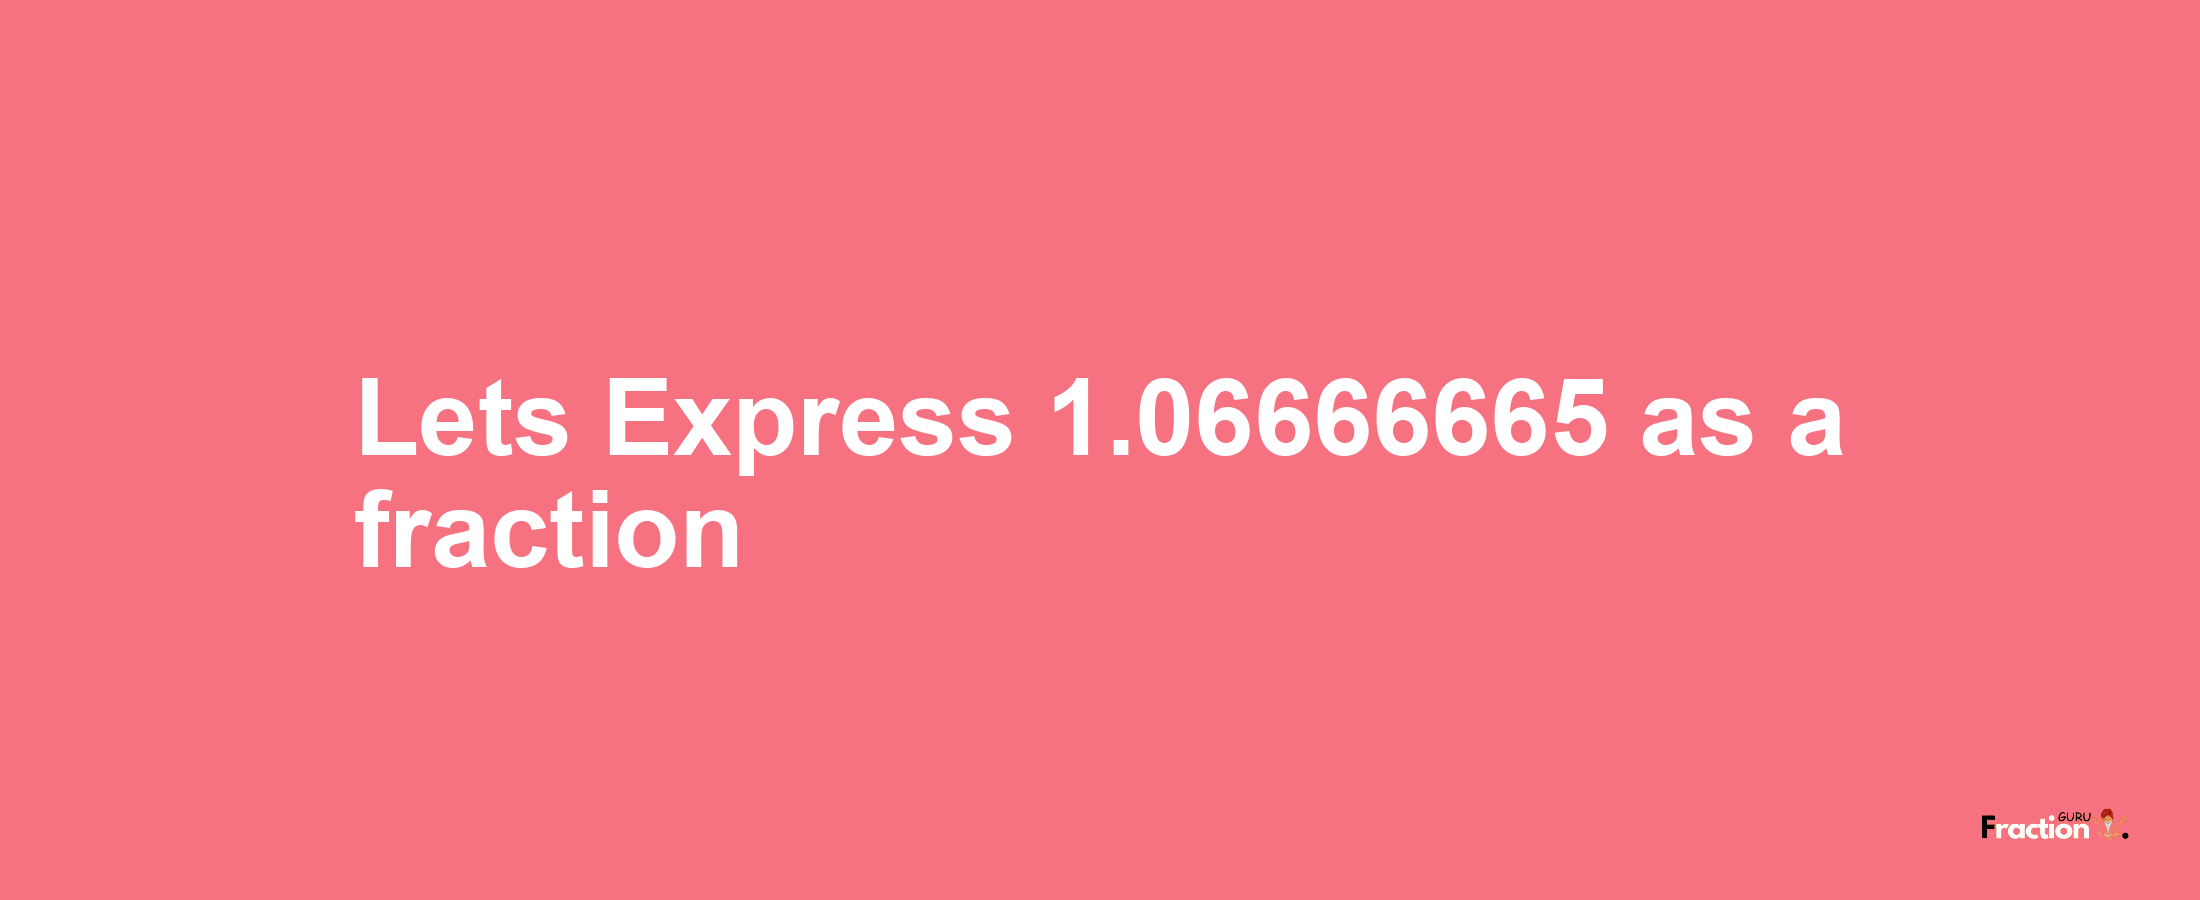 Lets Express 1.06666665 as afraction